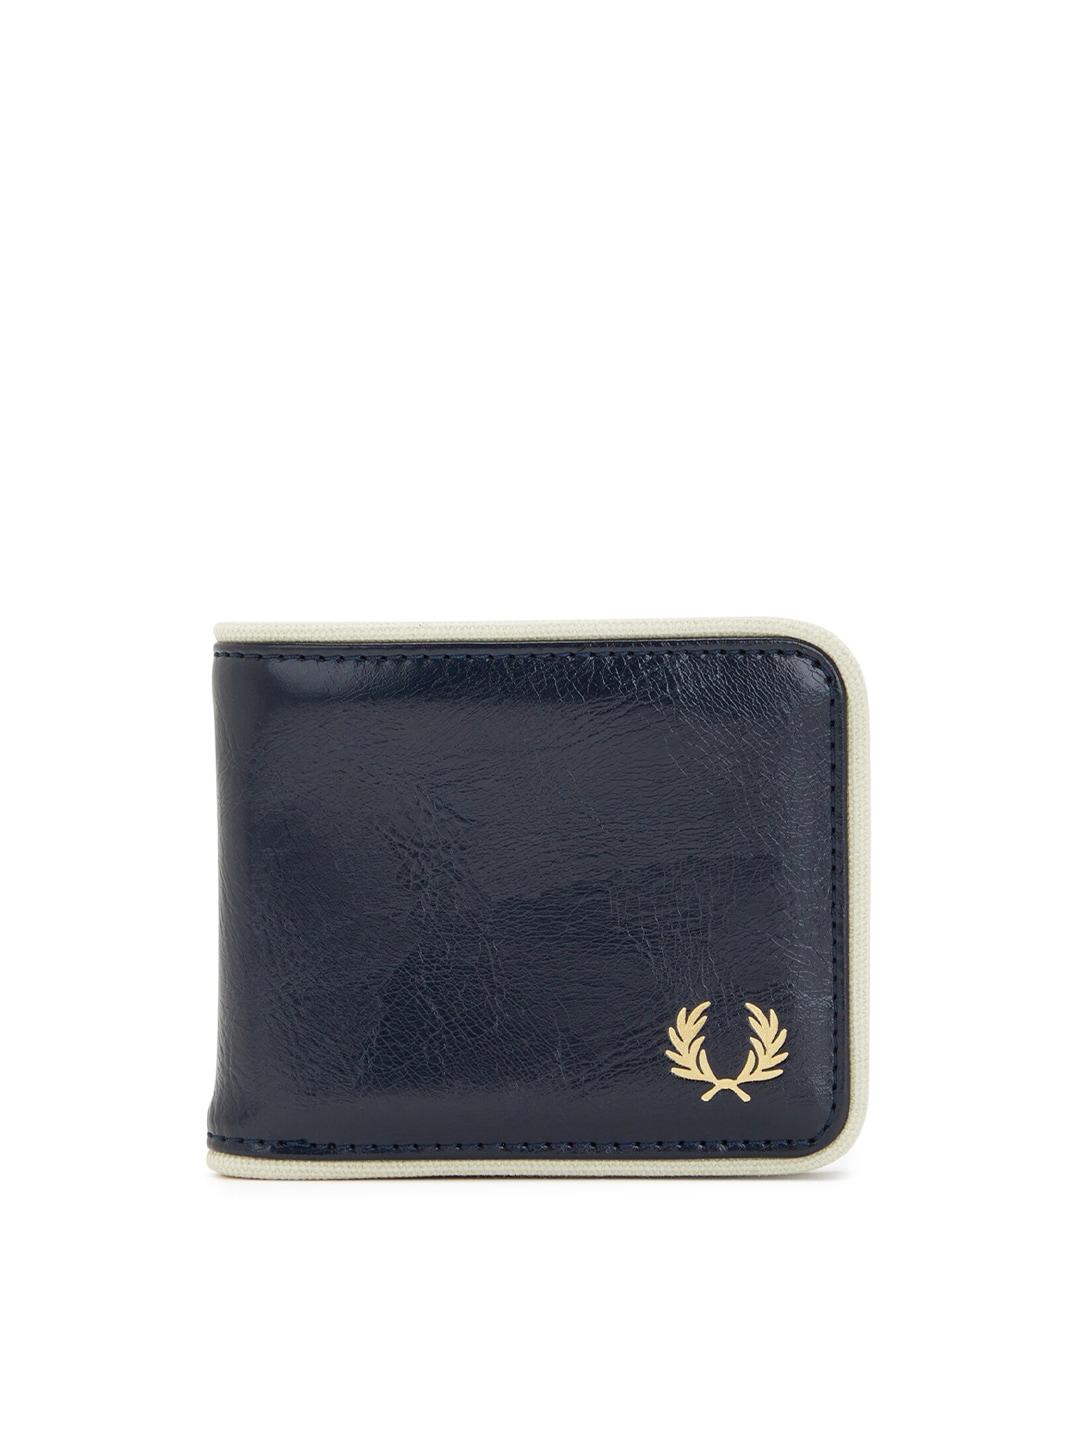 fred perry men navy blue textured pu card holder